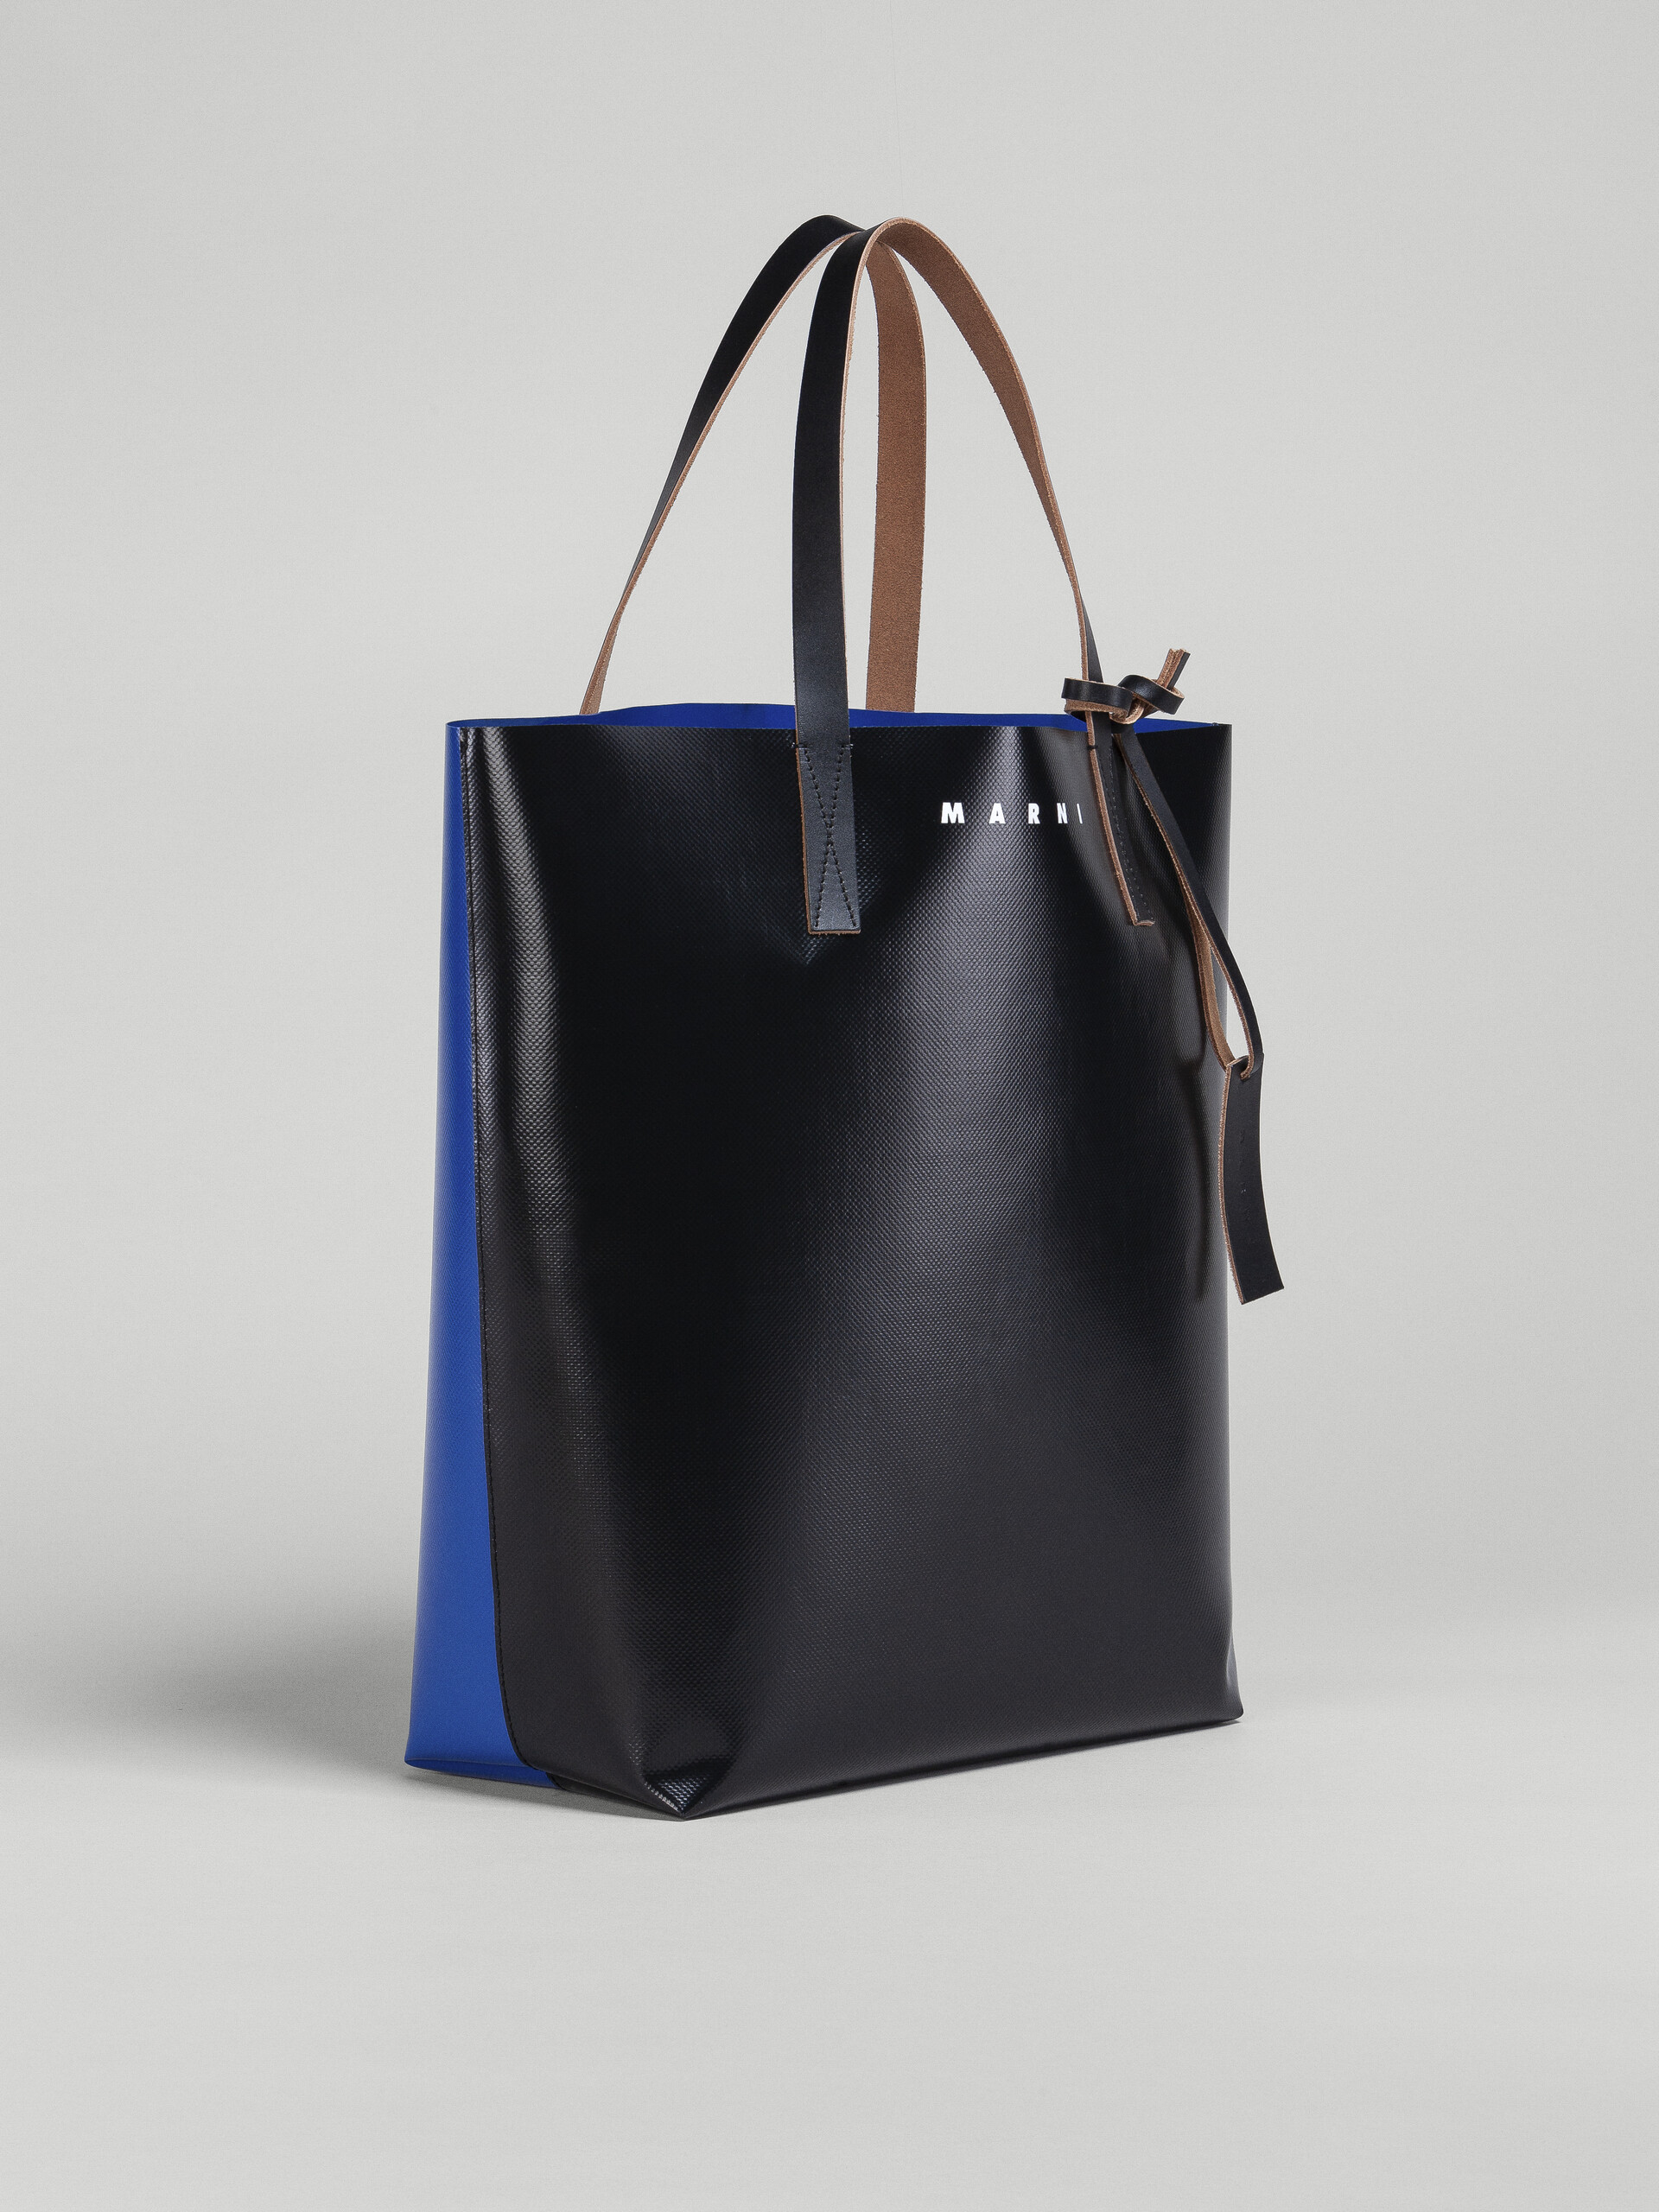 Marni Leather Shopping Bag in Black Womens Bags Tote bags 